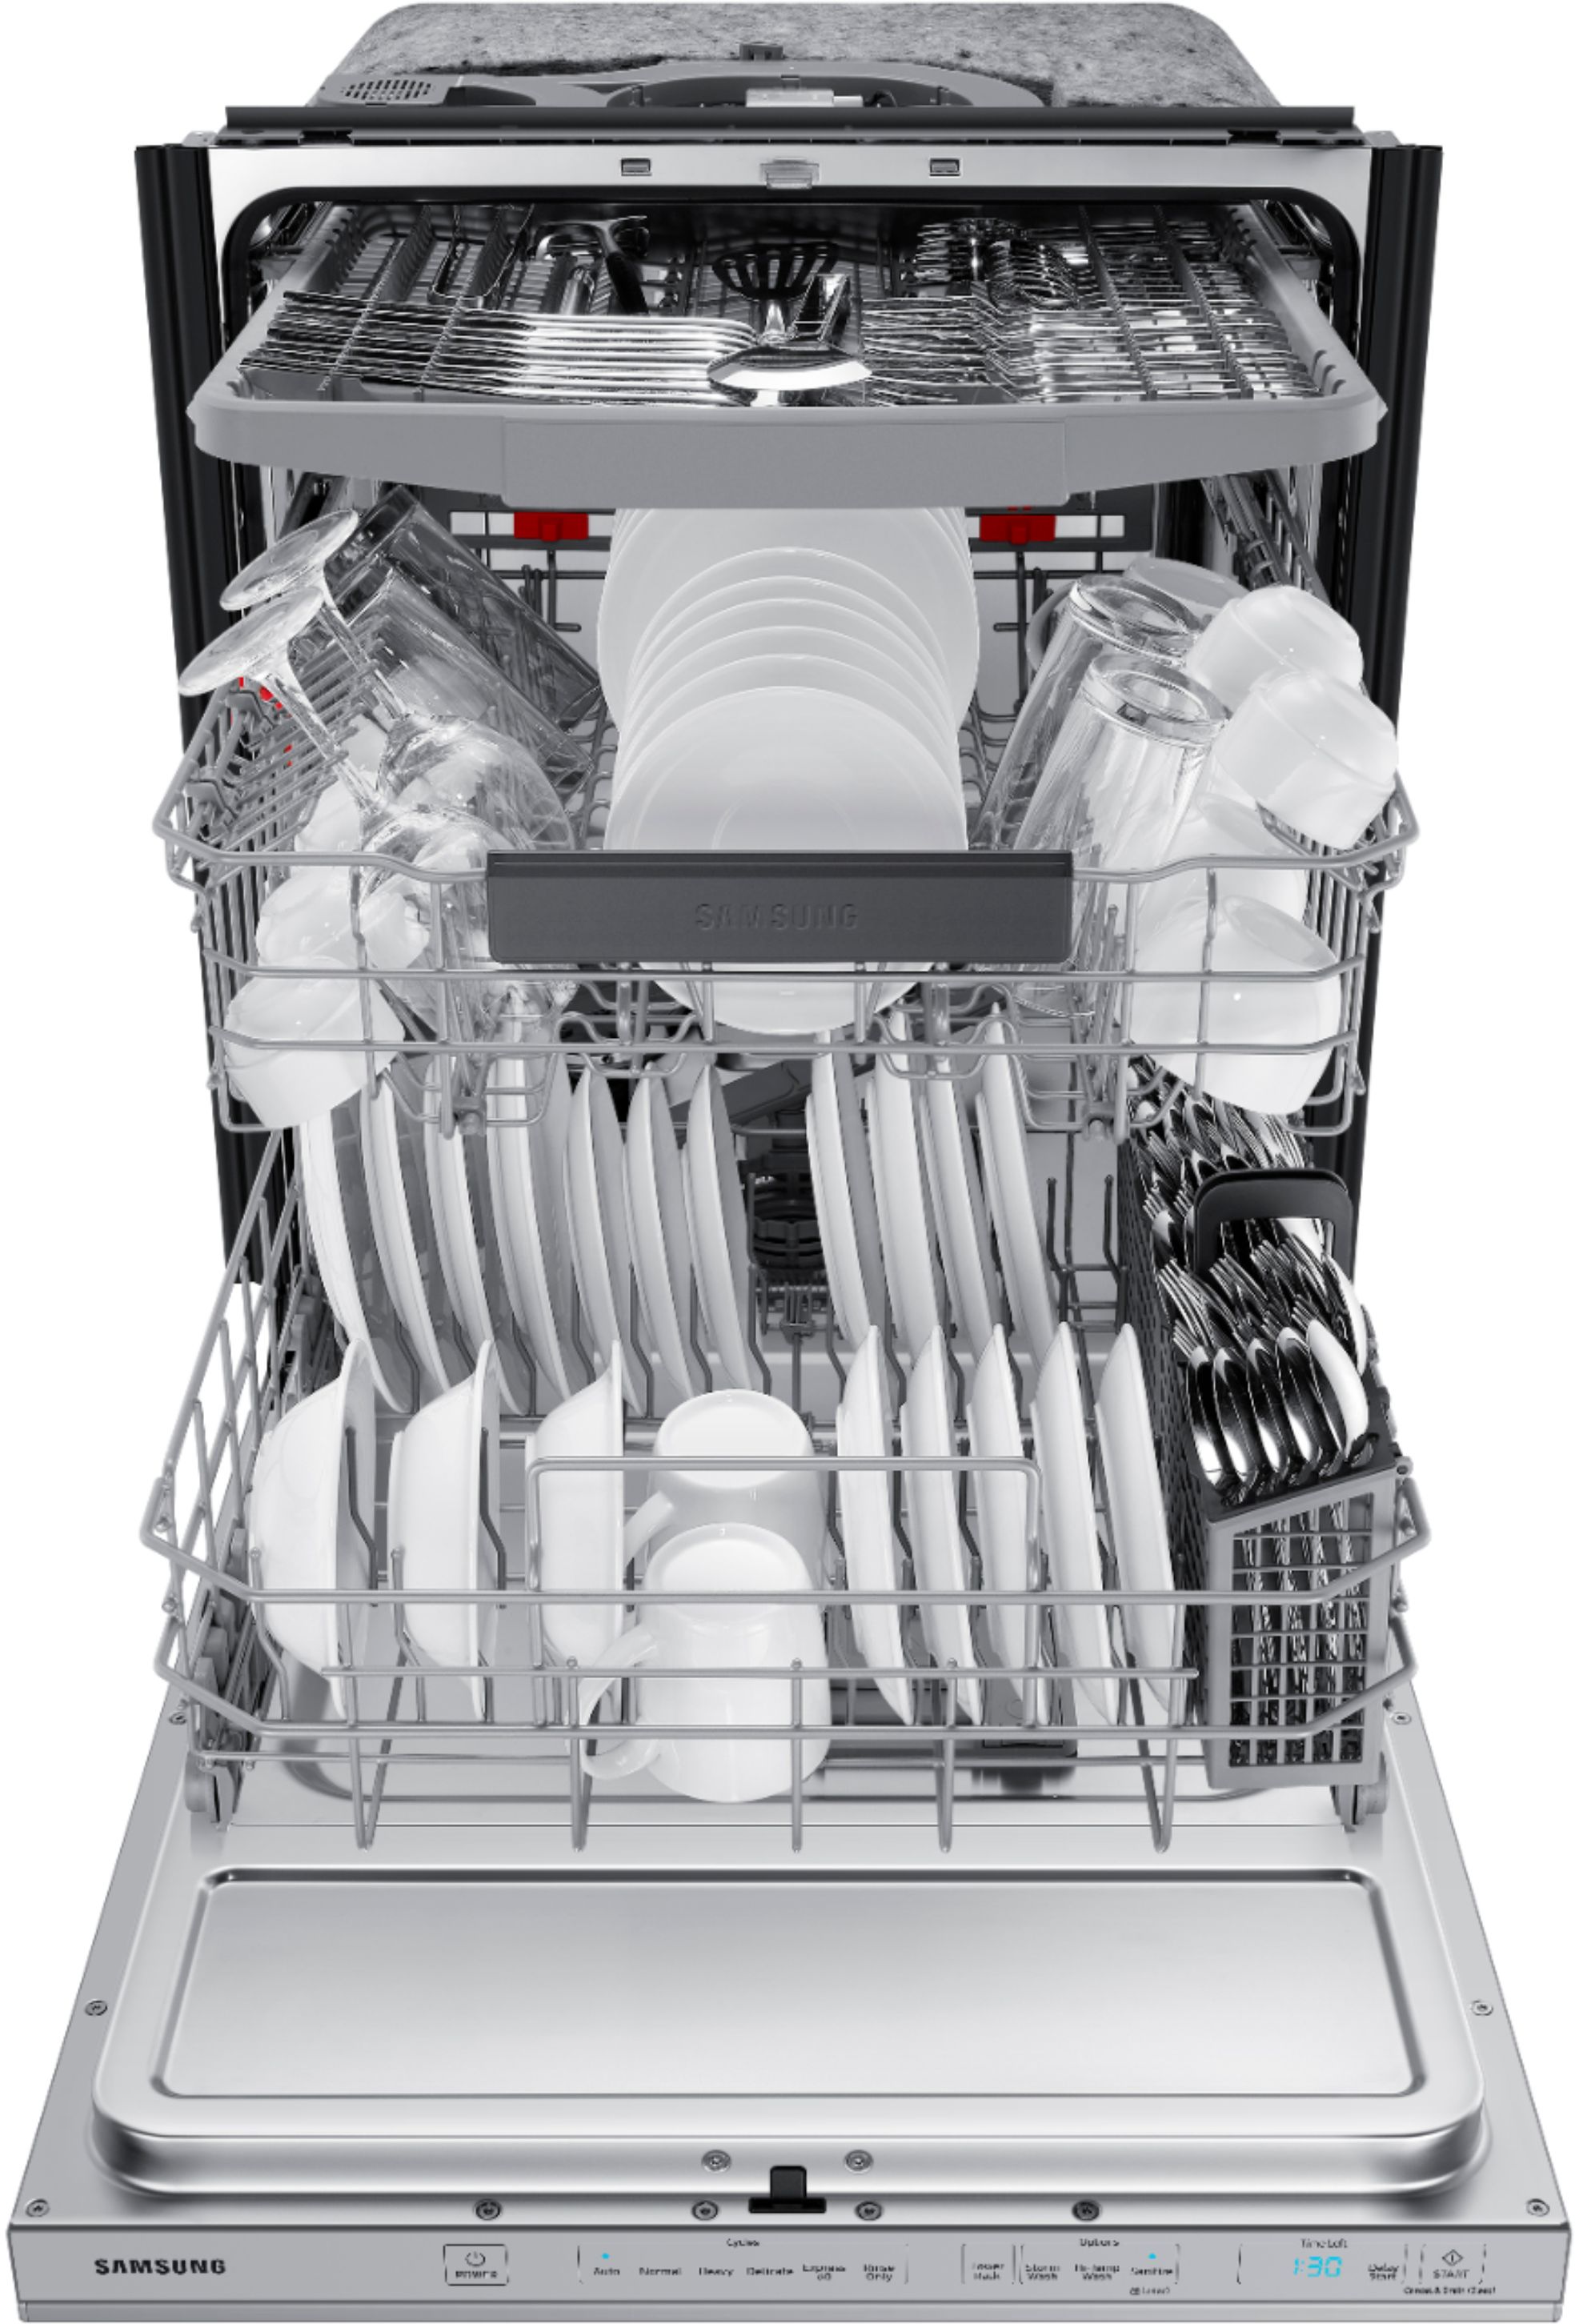 Samsung StormWash 24 Top Control Built-In Dishwasher with AutoRelease Dry,  3rd Rack, 42 dBA Stainless Steel DW80R7060US - Best Buy